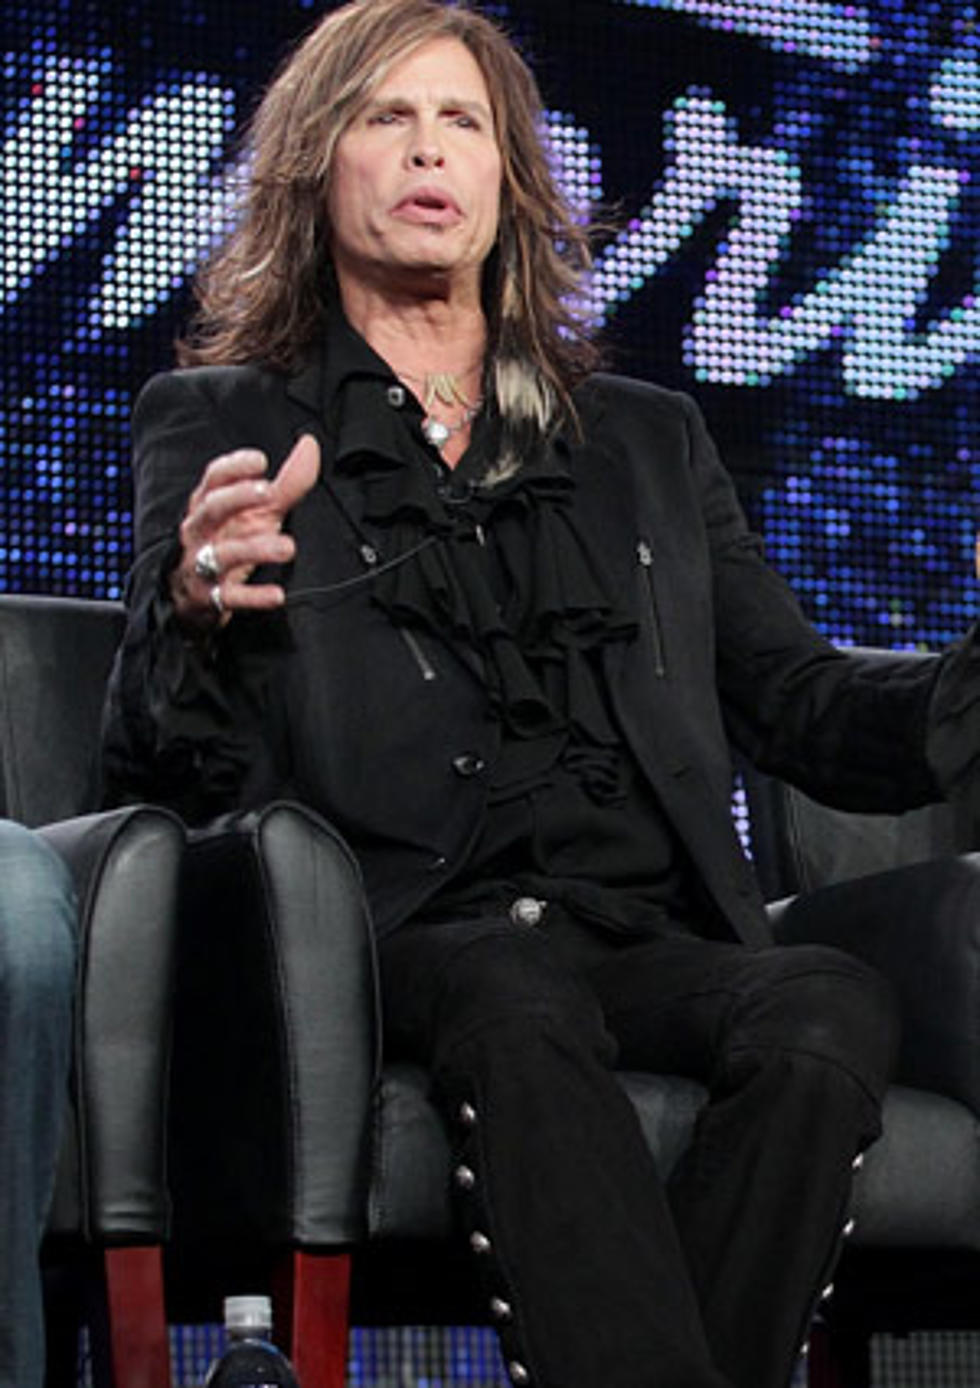 &#8216;American Idol&#8217; Judge Steven Tyler Welcomes Country Music